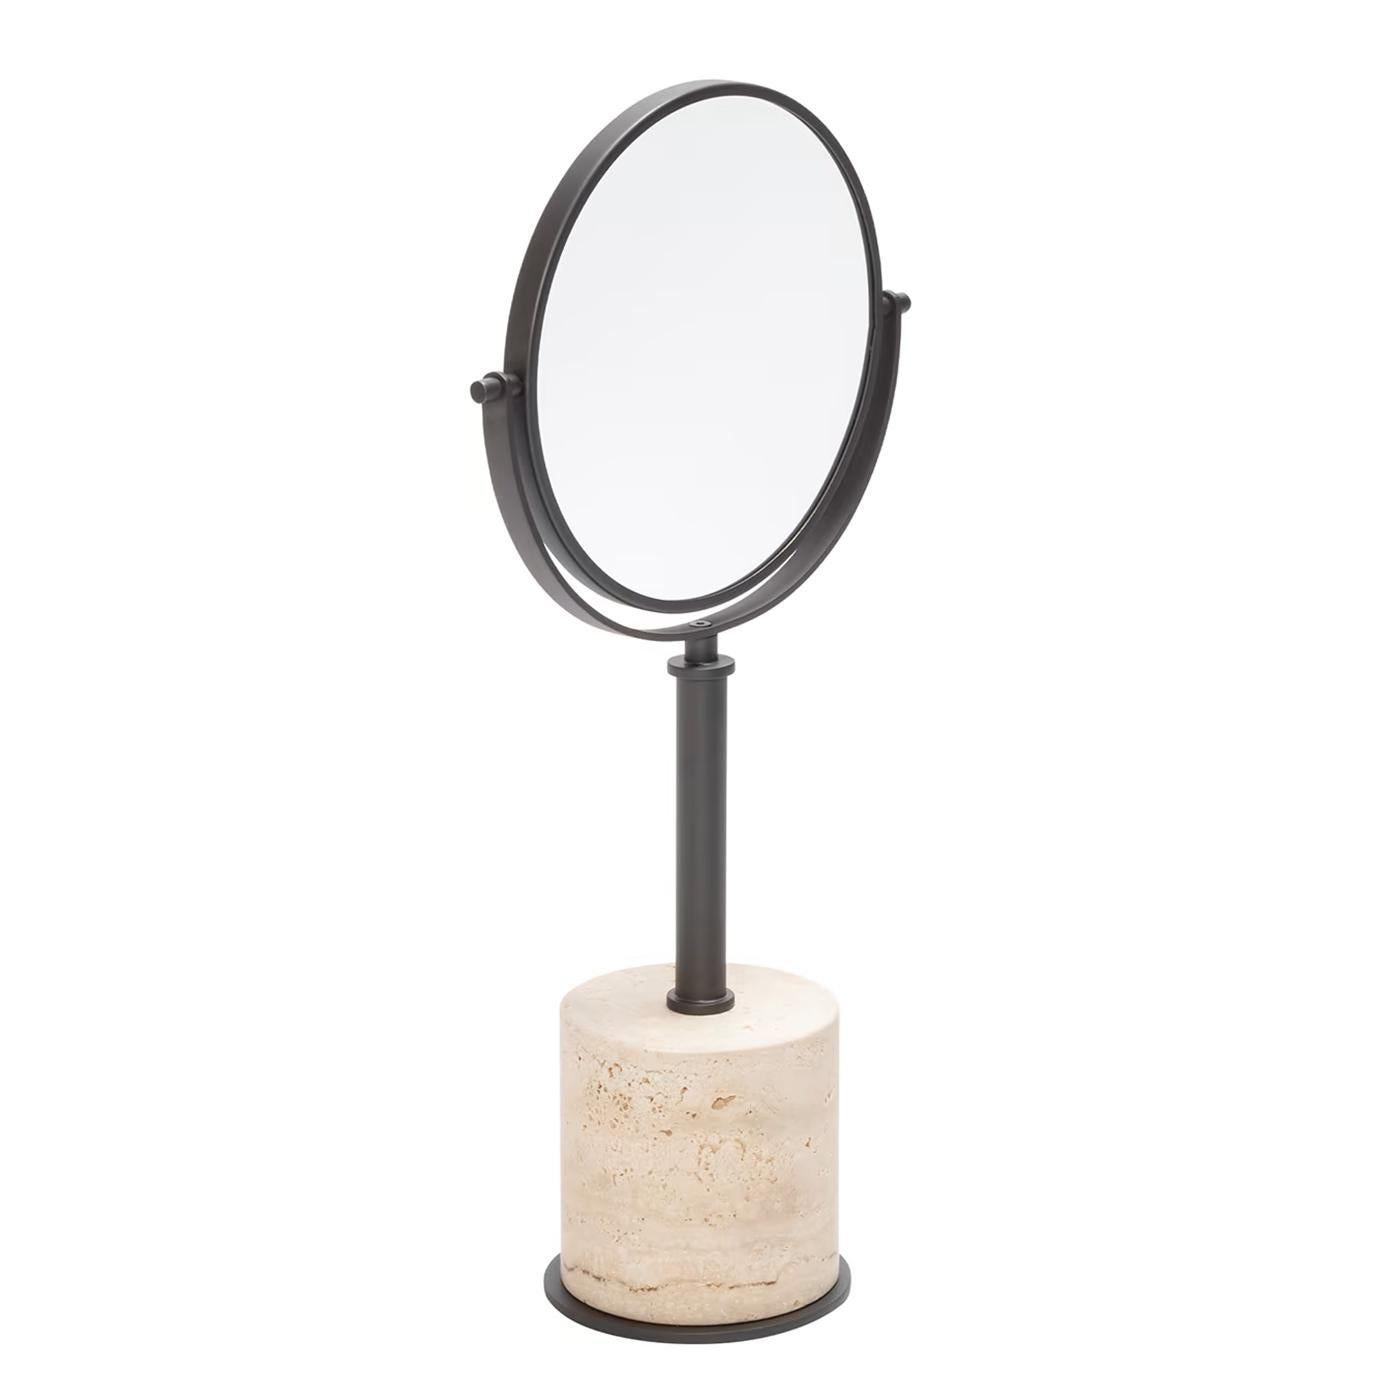 Mirror Emma travertine stand with structure in 
bronze finish and with base in travertine marble.